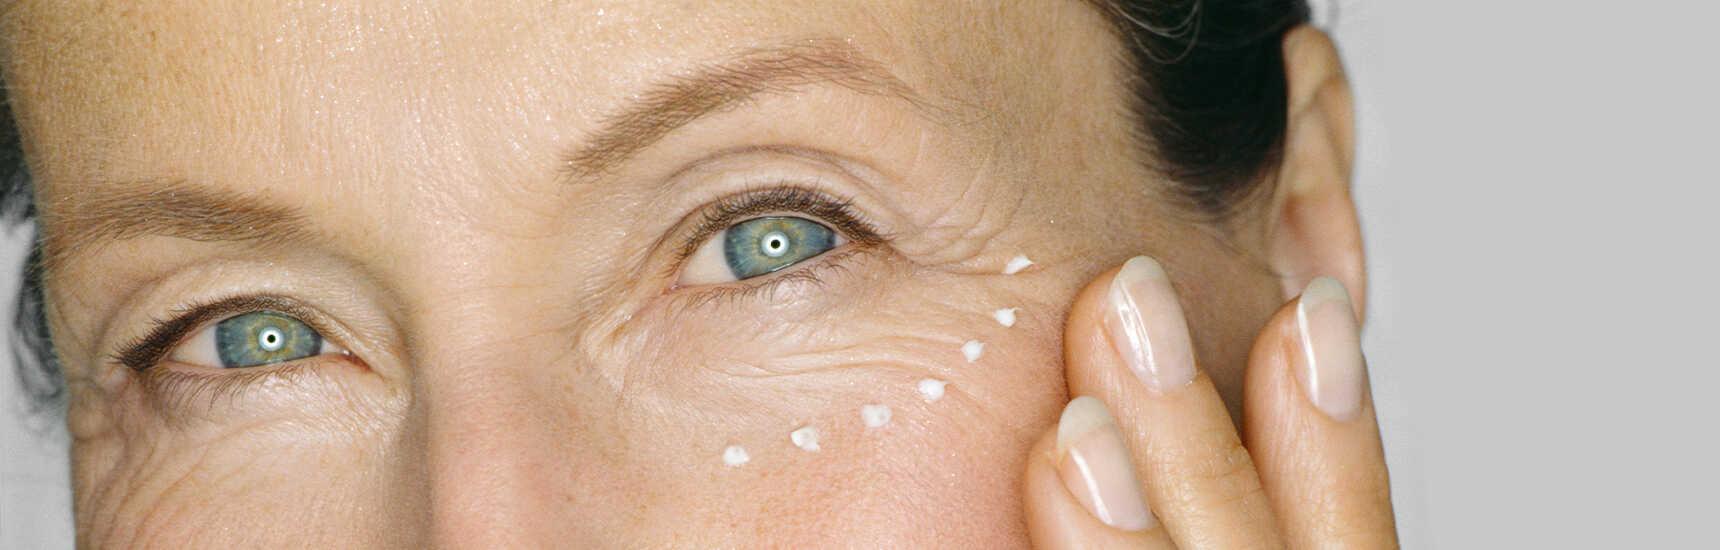 Do Eye Creams Actually Work for Wrinkles? - The New York Times